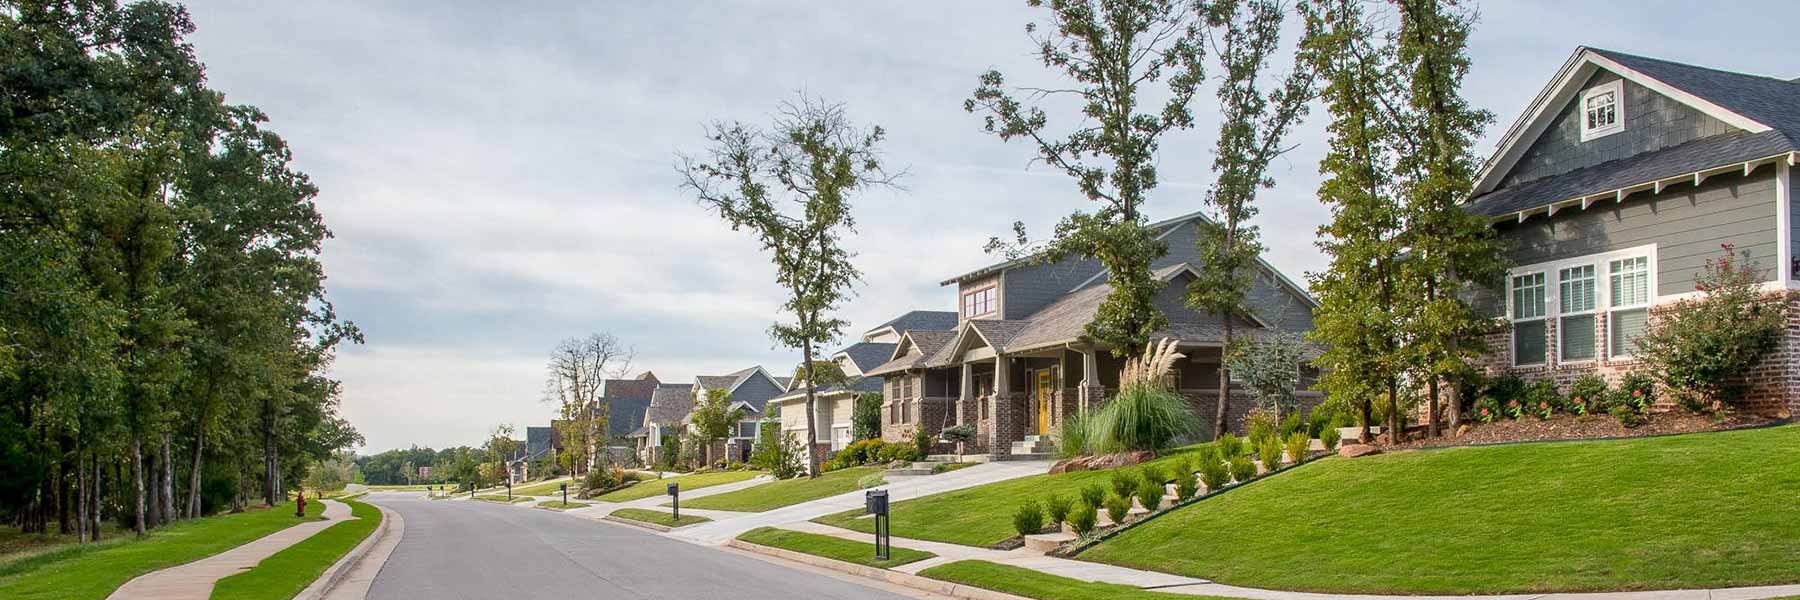 Town Square Community, by McCaleb Homes